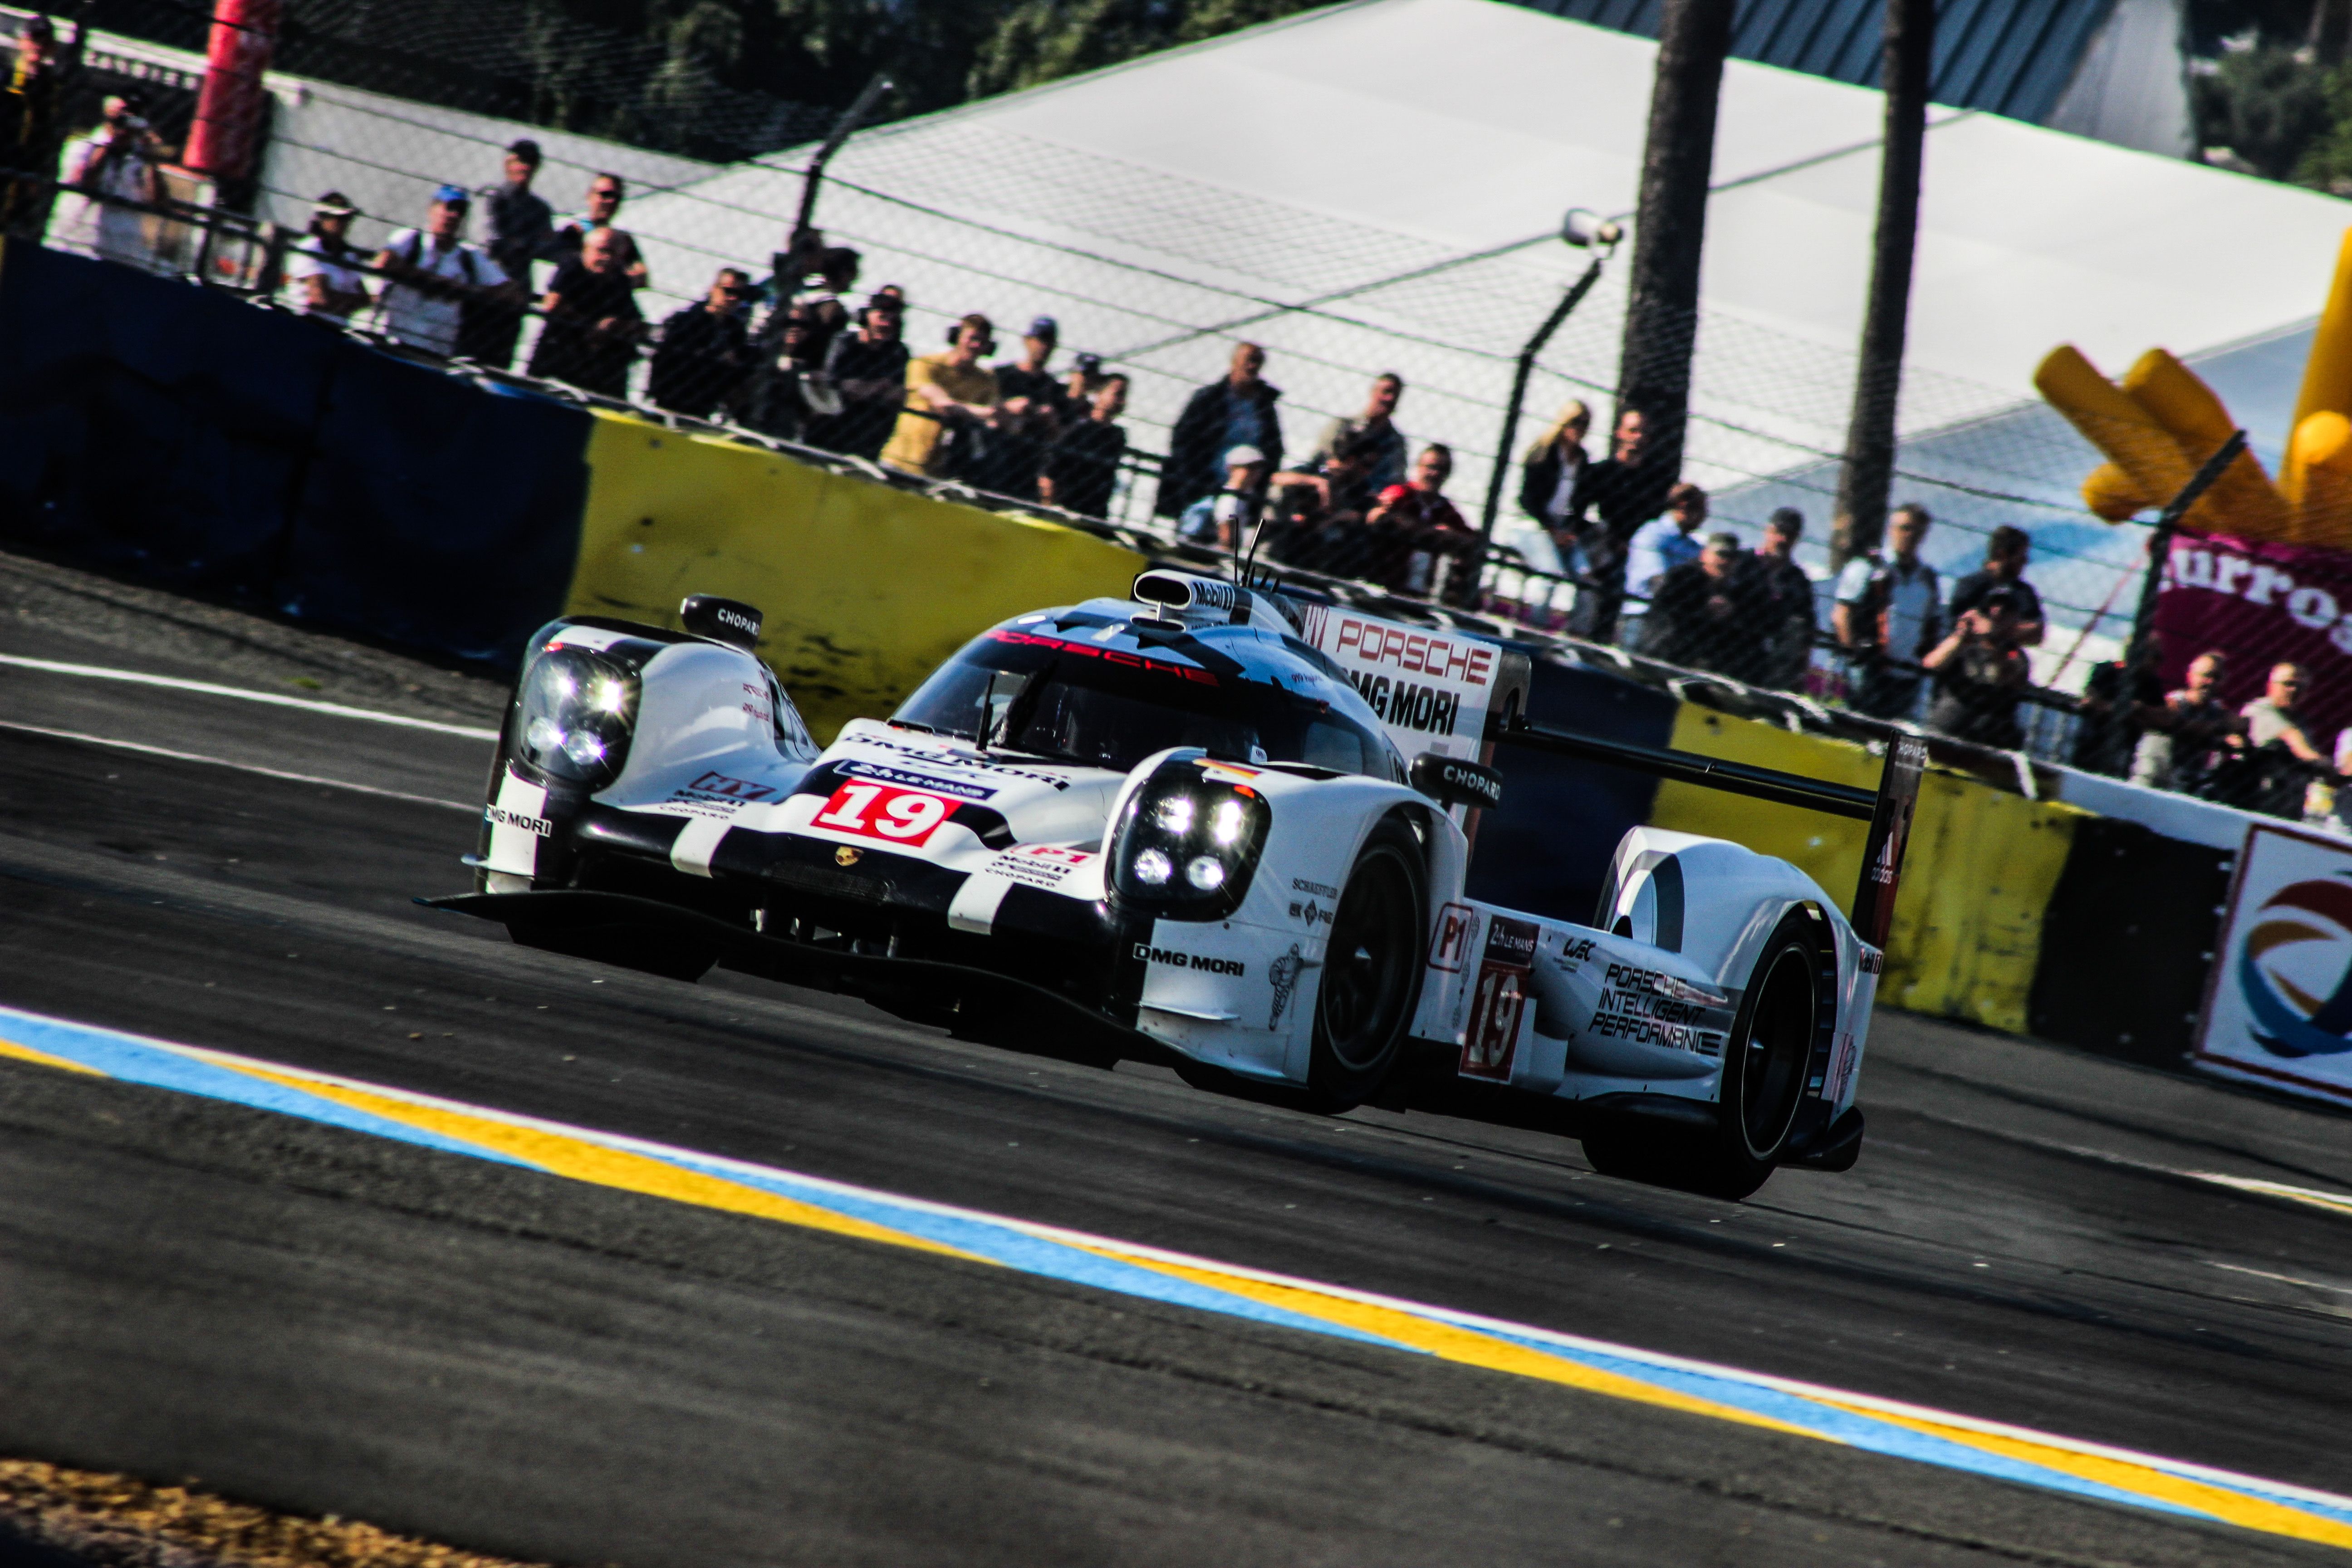 Follow the Porsche 919 Hybrid from concept to Le Mans victory